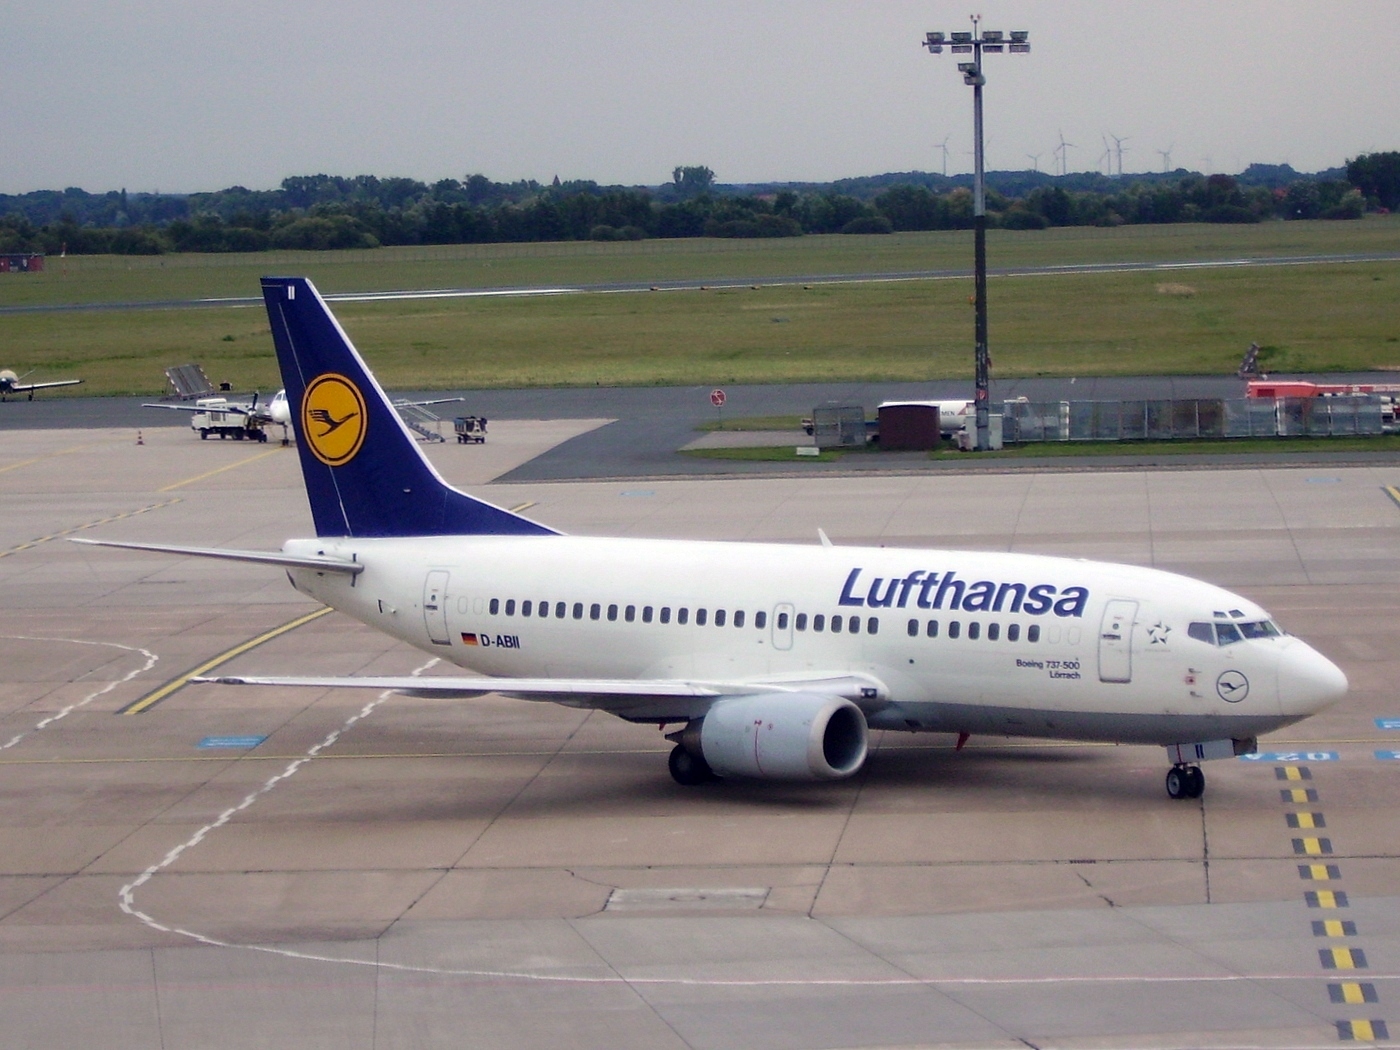 Airlines flying the Boeing 737-500 pax